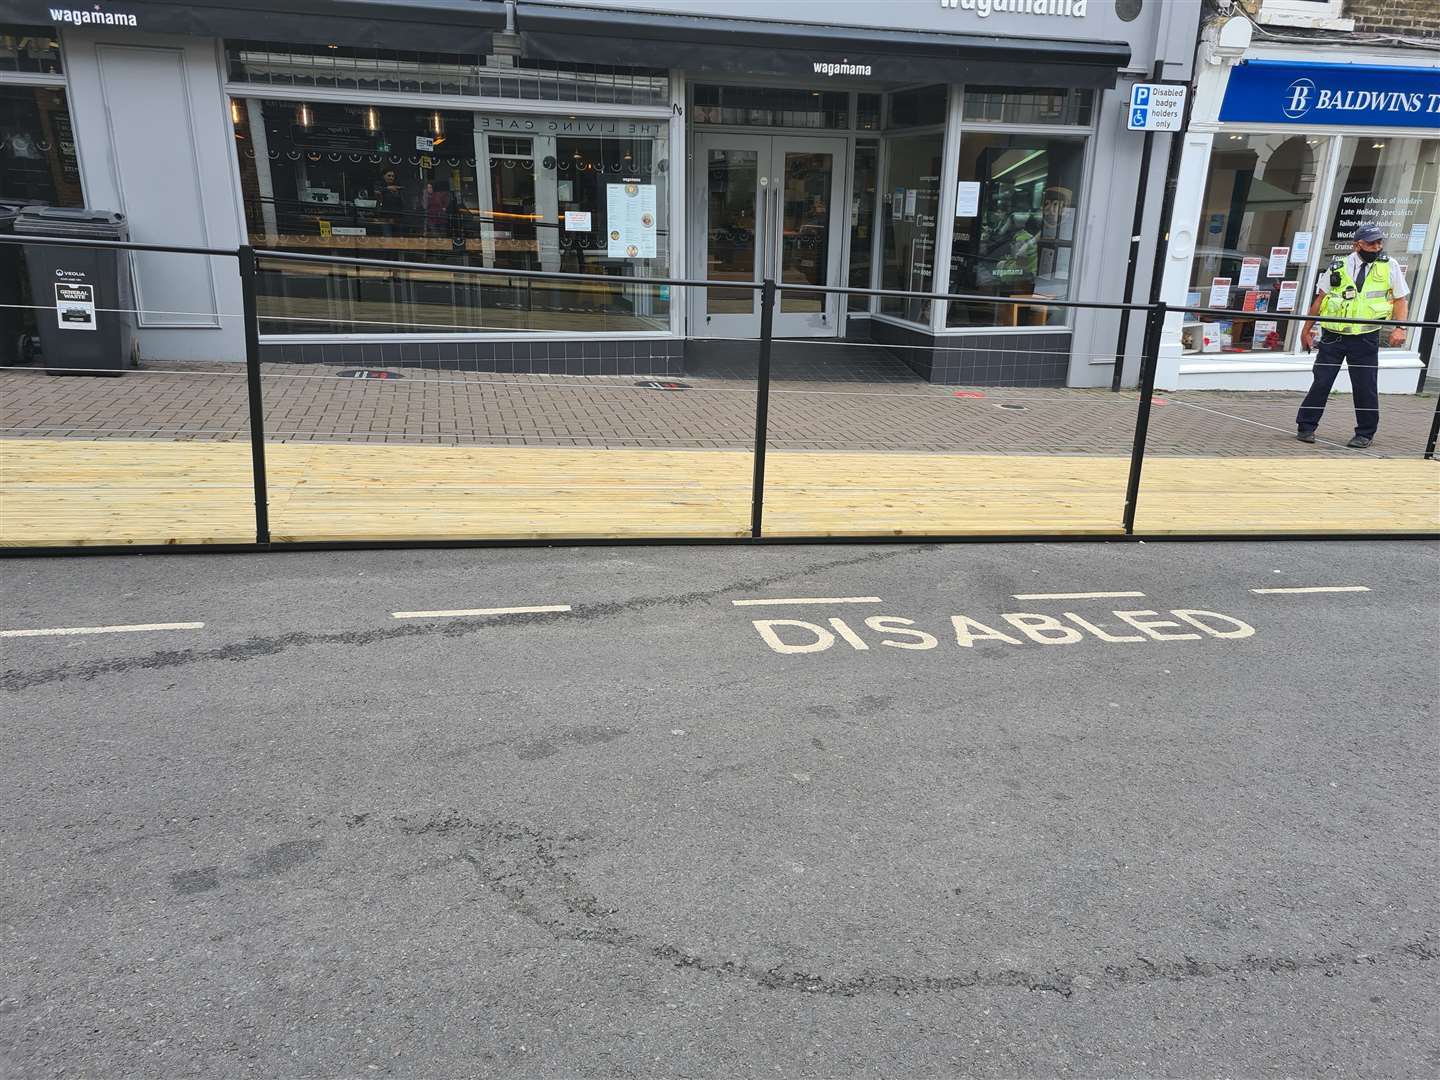 The disabled bay in Earl Street has become a 'parklet'